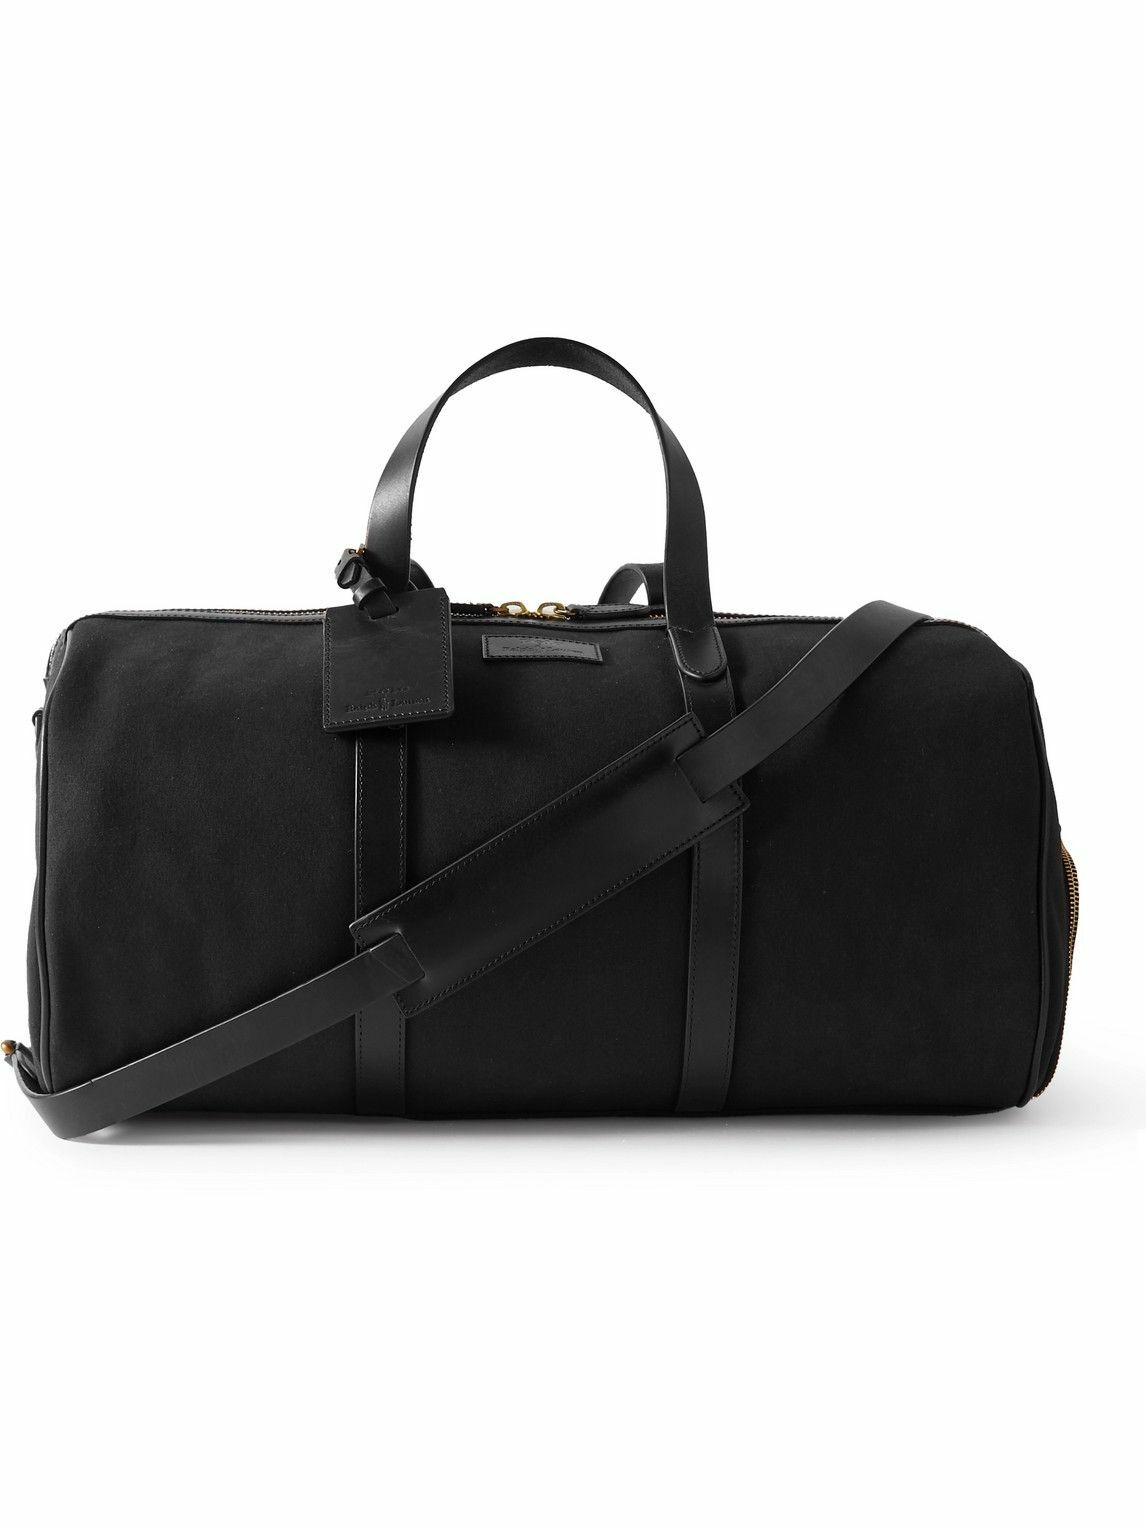 Photo: Polo Ralph Lauren - Leather-Trimmed Canvas Weekend Bag